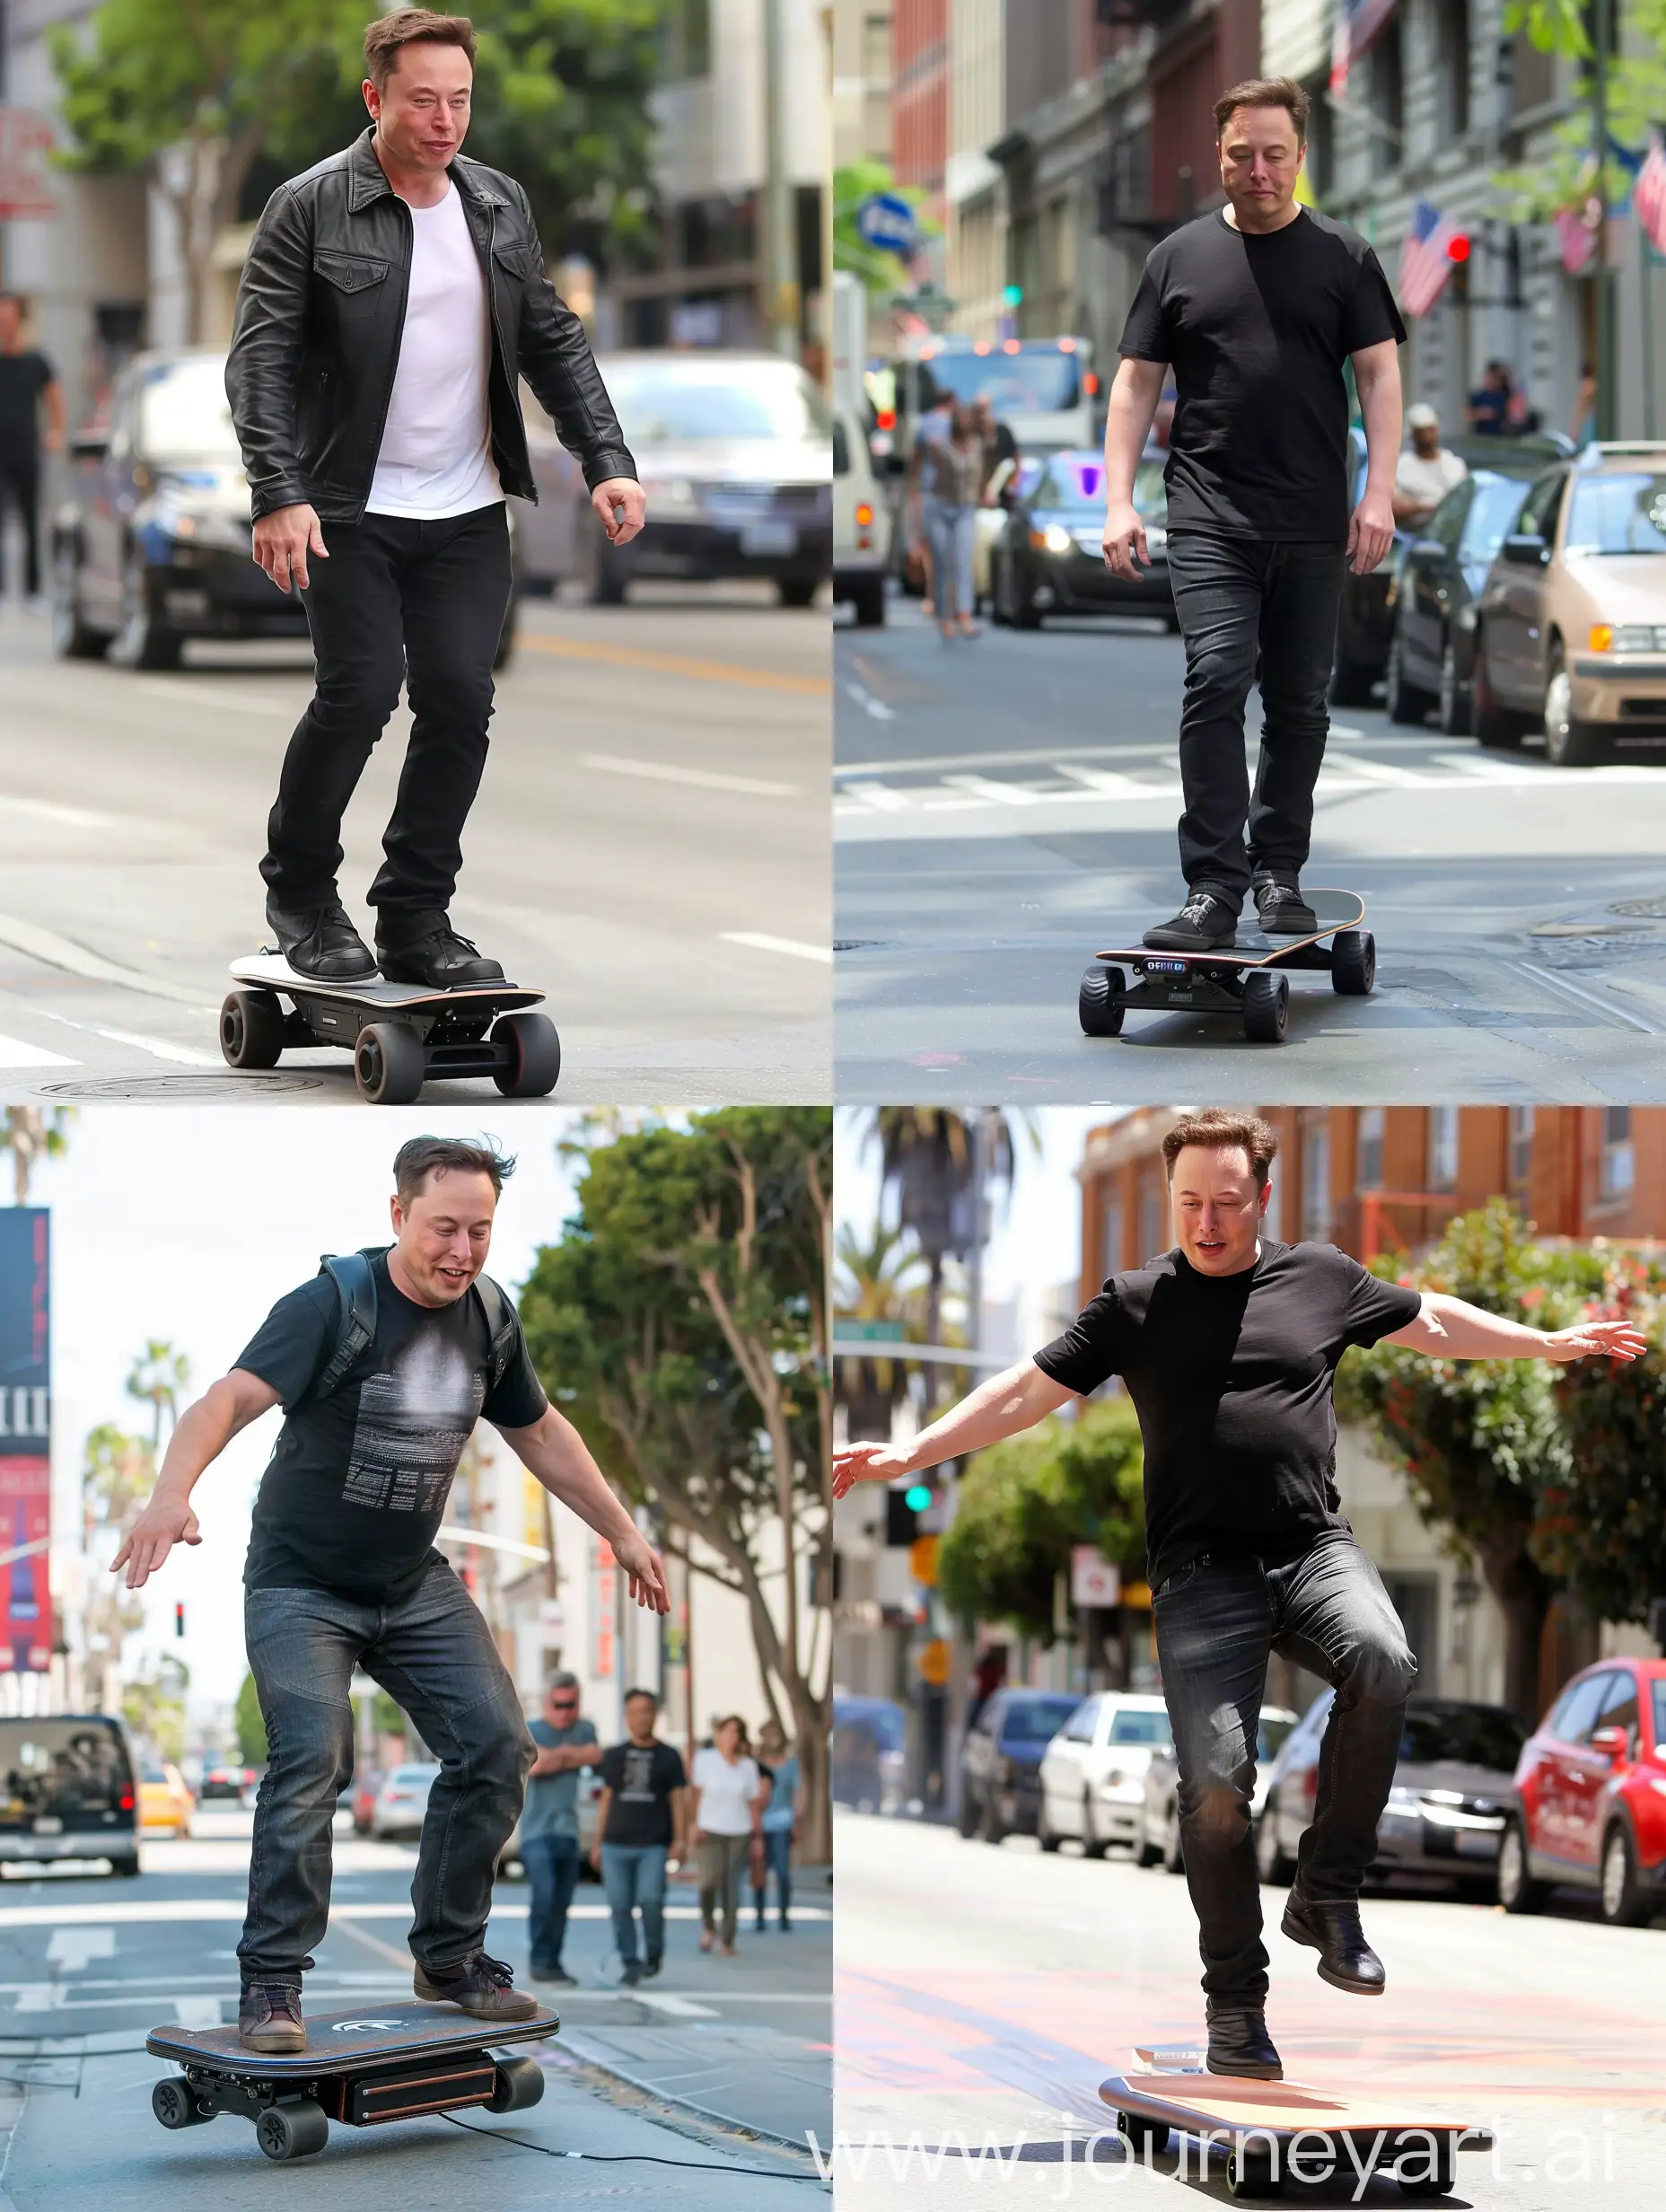 elon musk riding a hoverboard in the streets no shirt